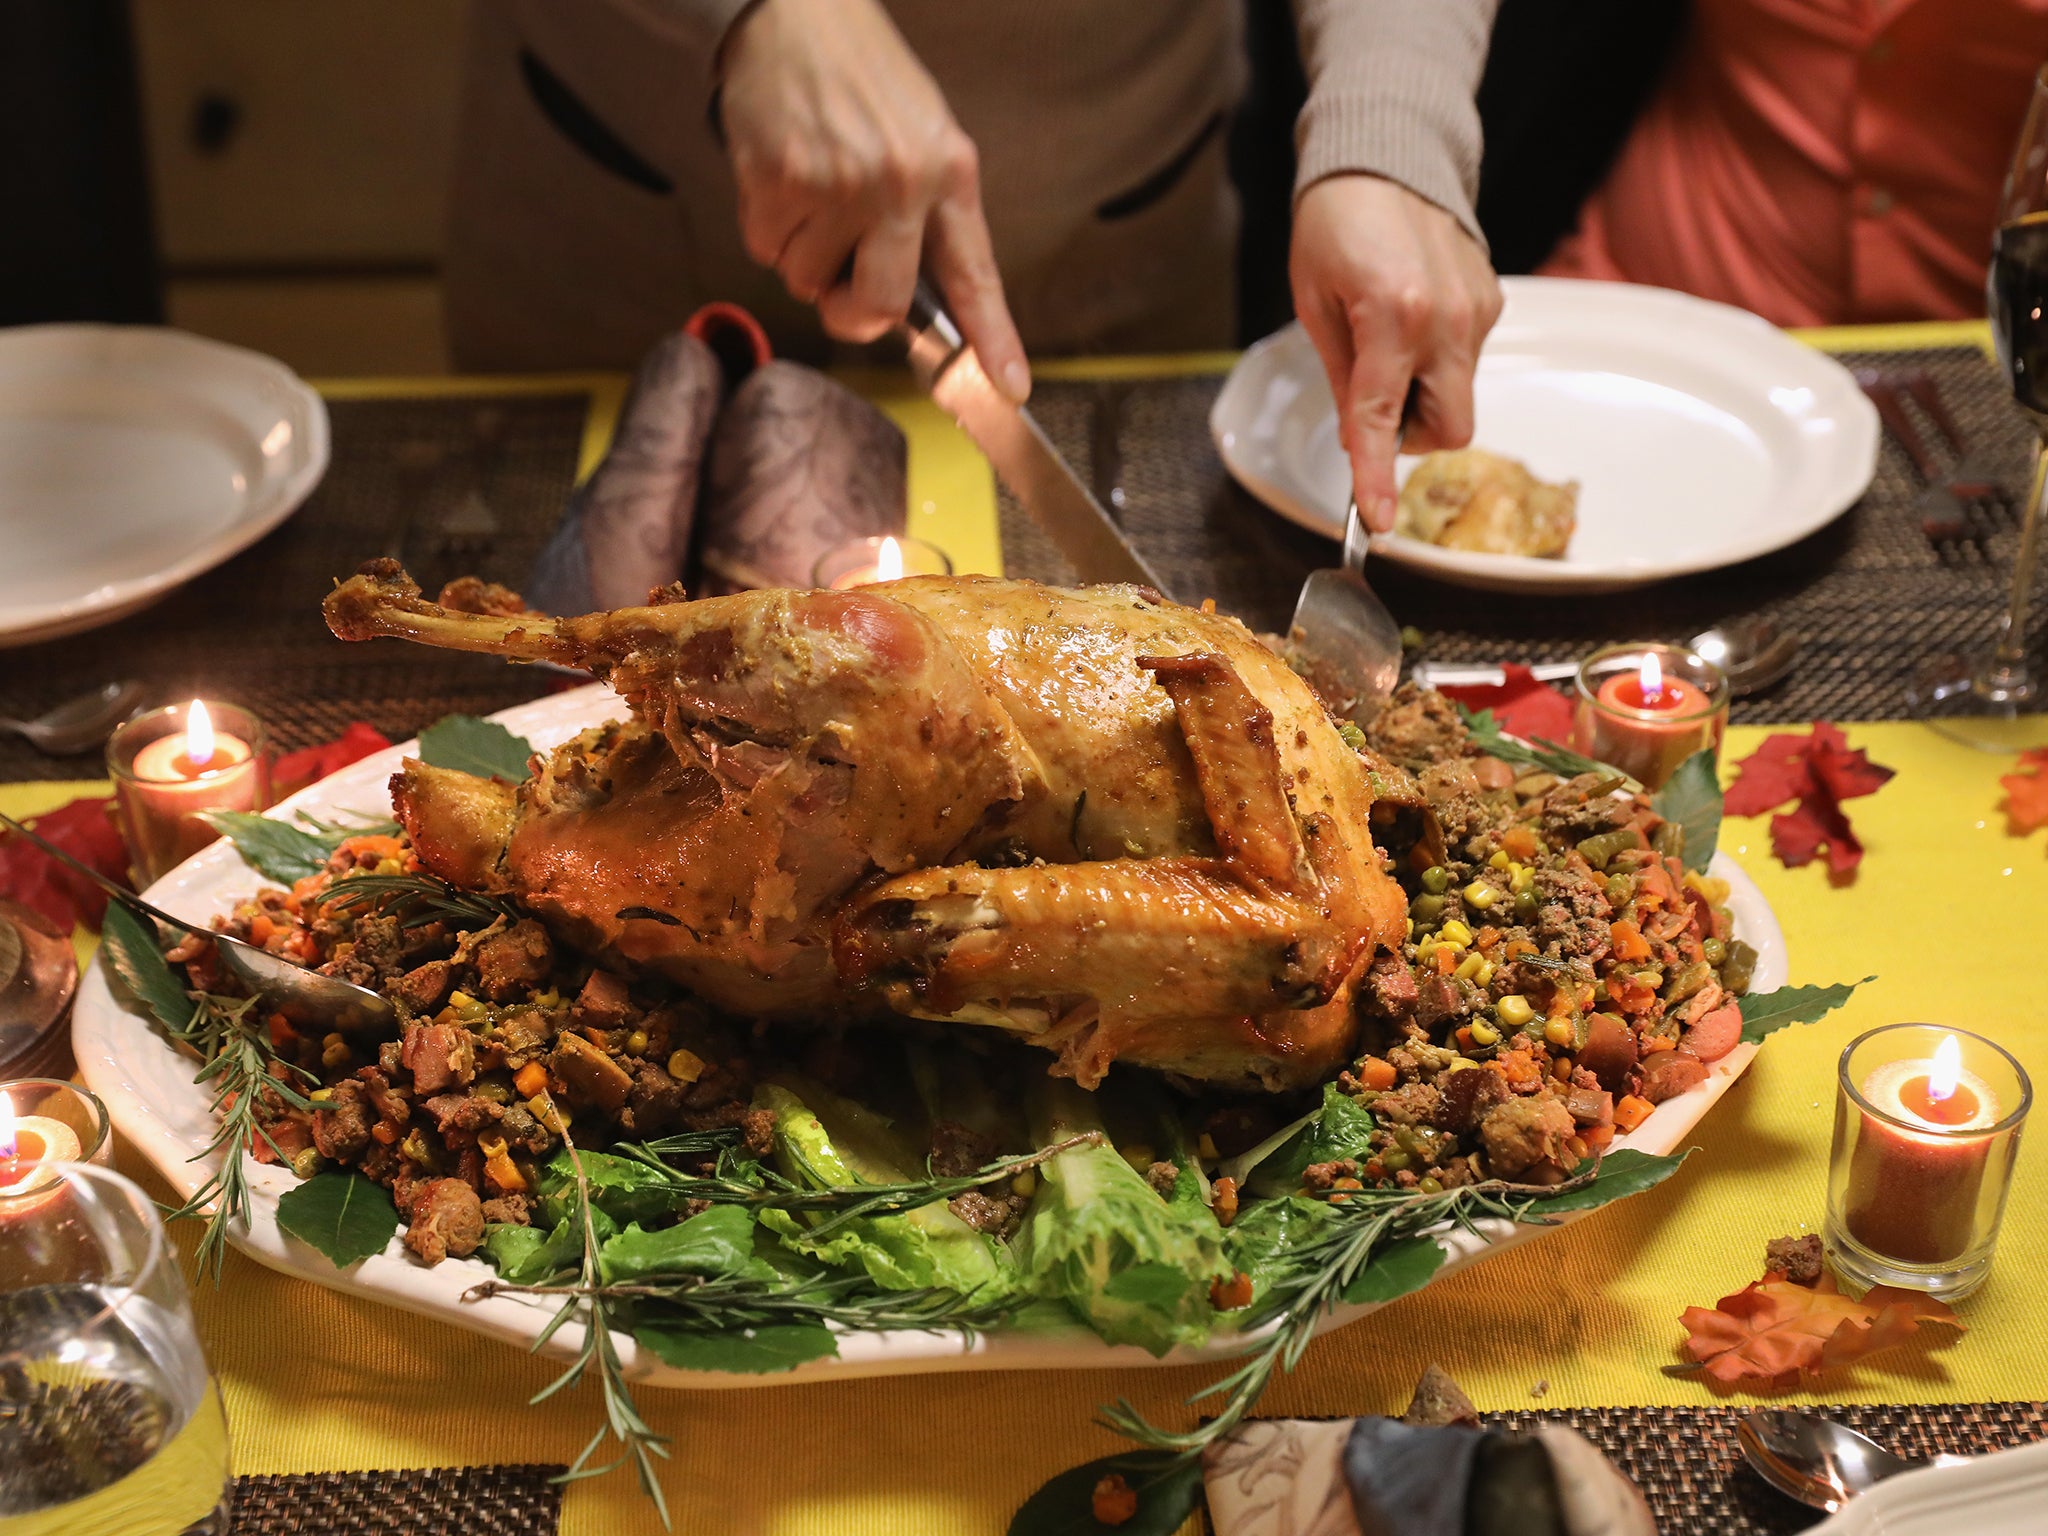 Nearly 40 million turkeys are cooked in the US each Thanksgiving